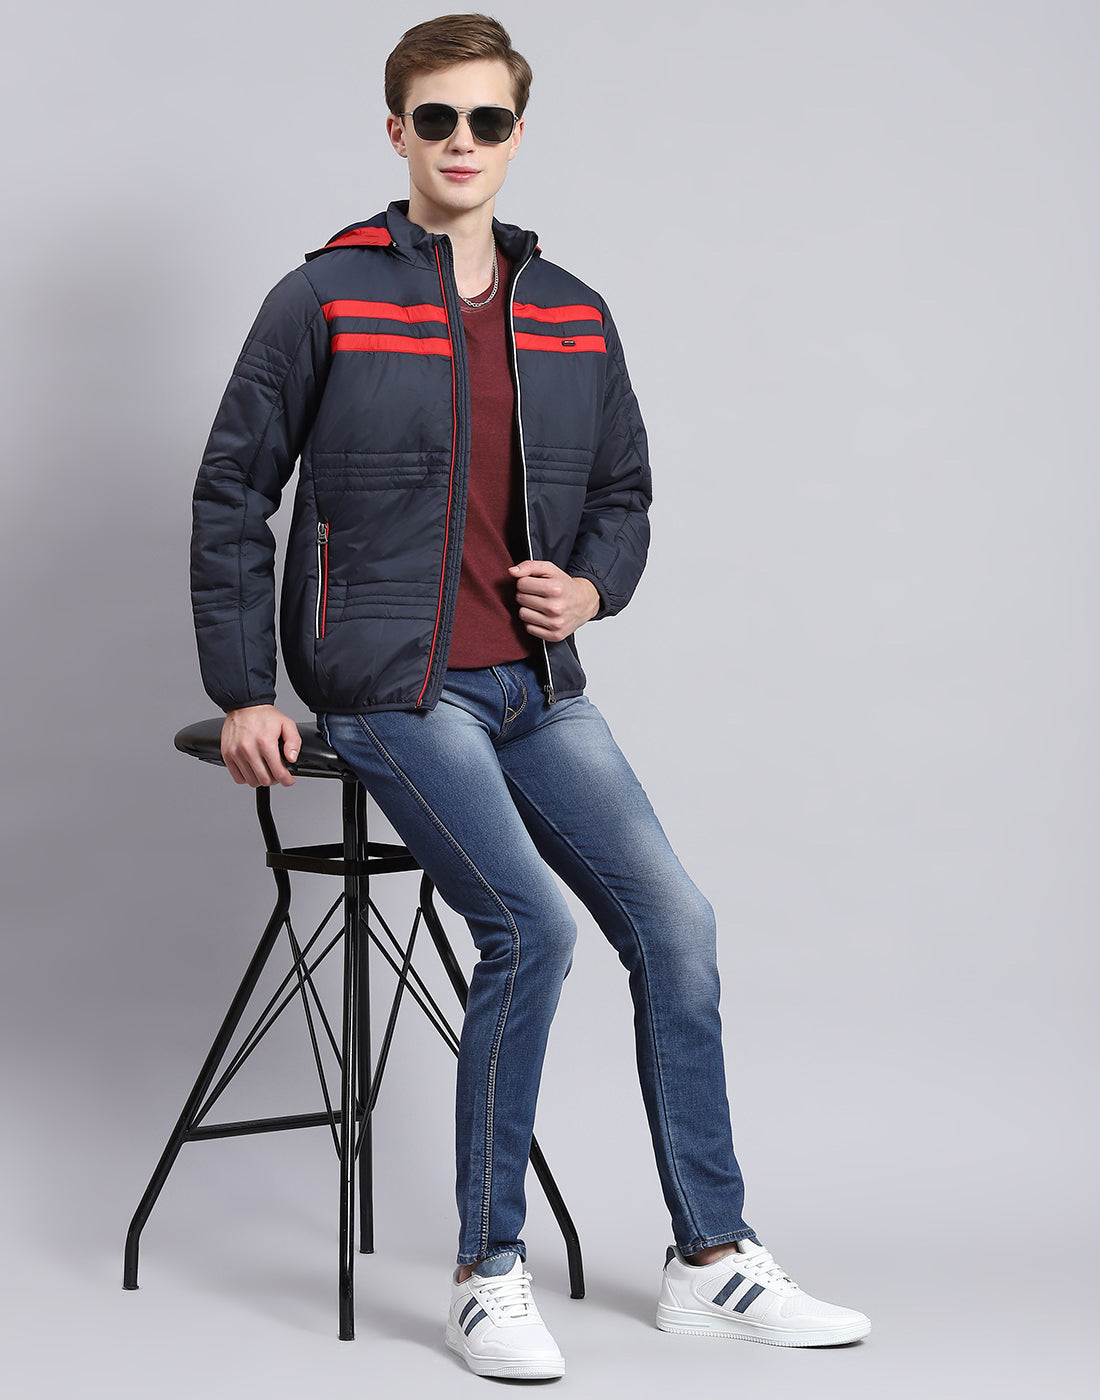 Buy Jackets For Men Online - Winter Jackets For Gents - Monte